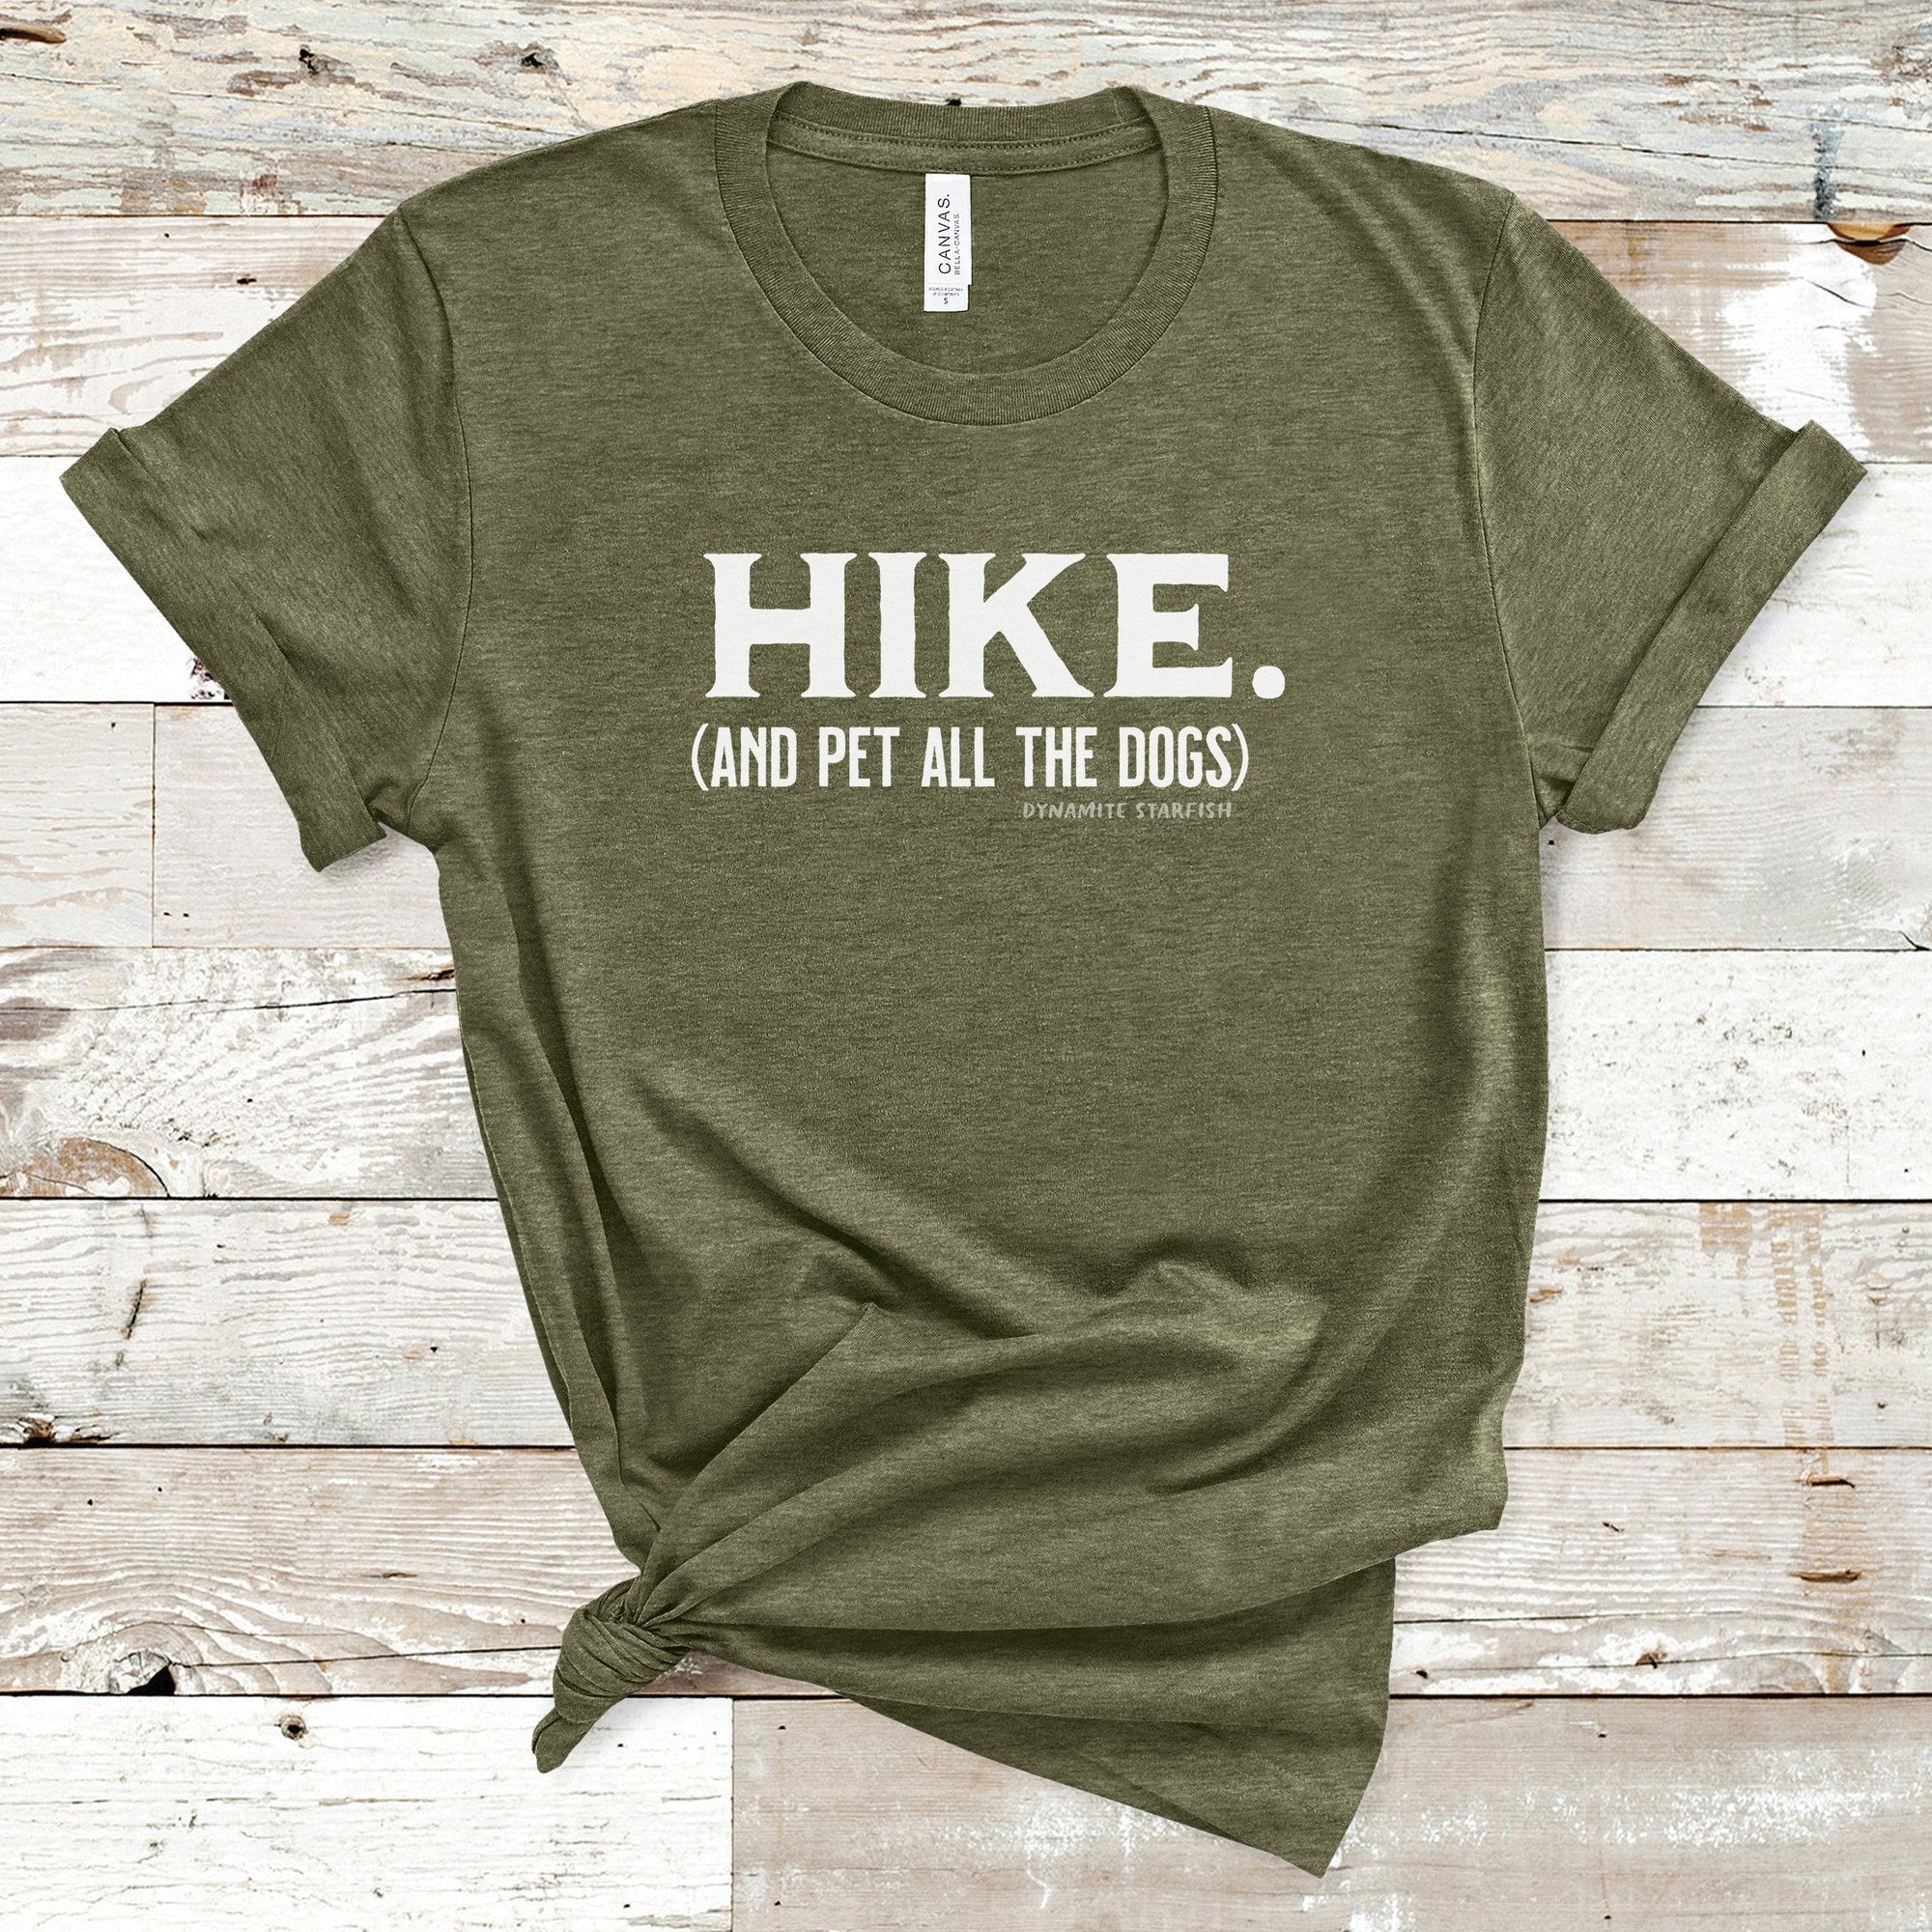 rock climbing t-shirts gifts - Unisex T-Shirts-Hike and Pet All the Dogs — Unisex Hiking T-Shirt - Dynamite Starfish - gift for climber